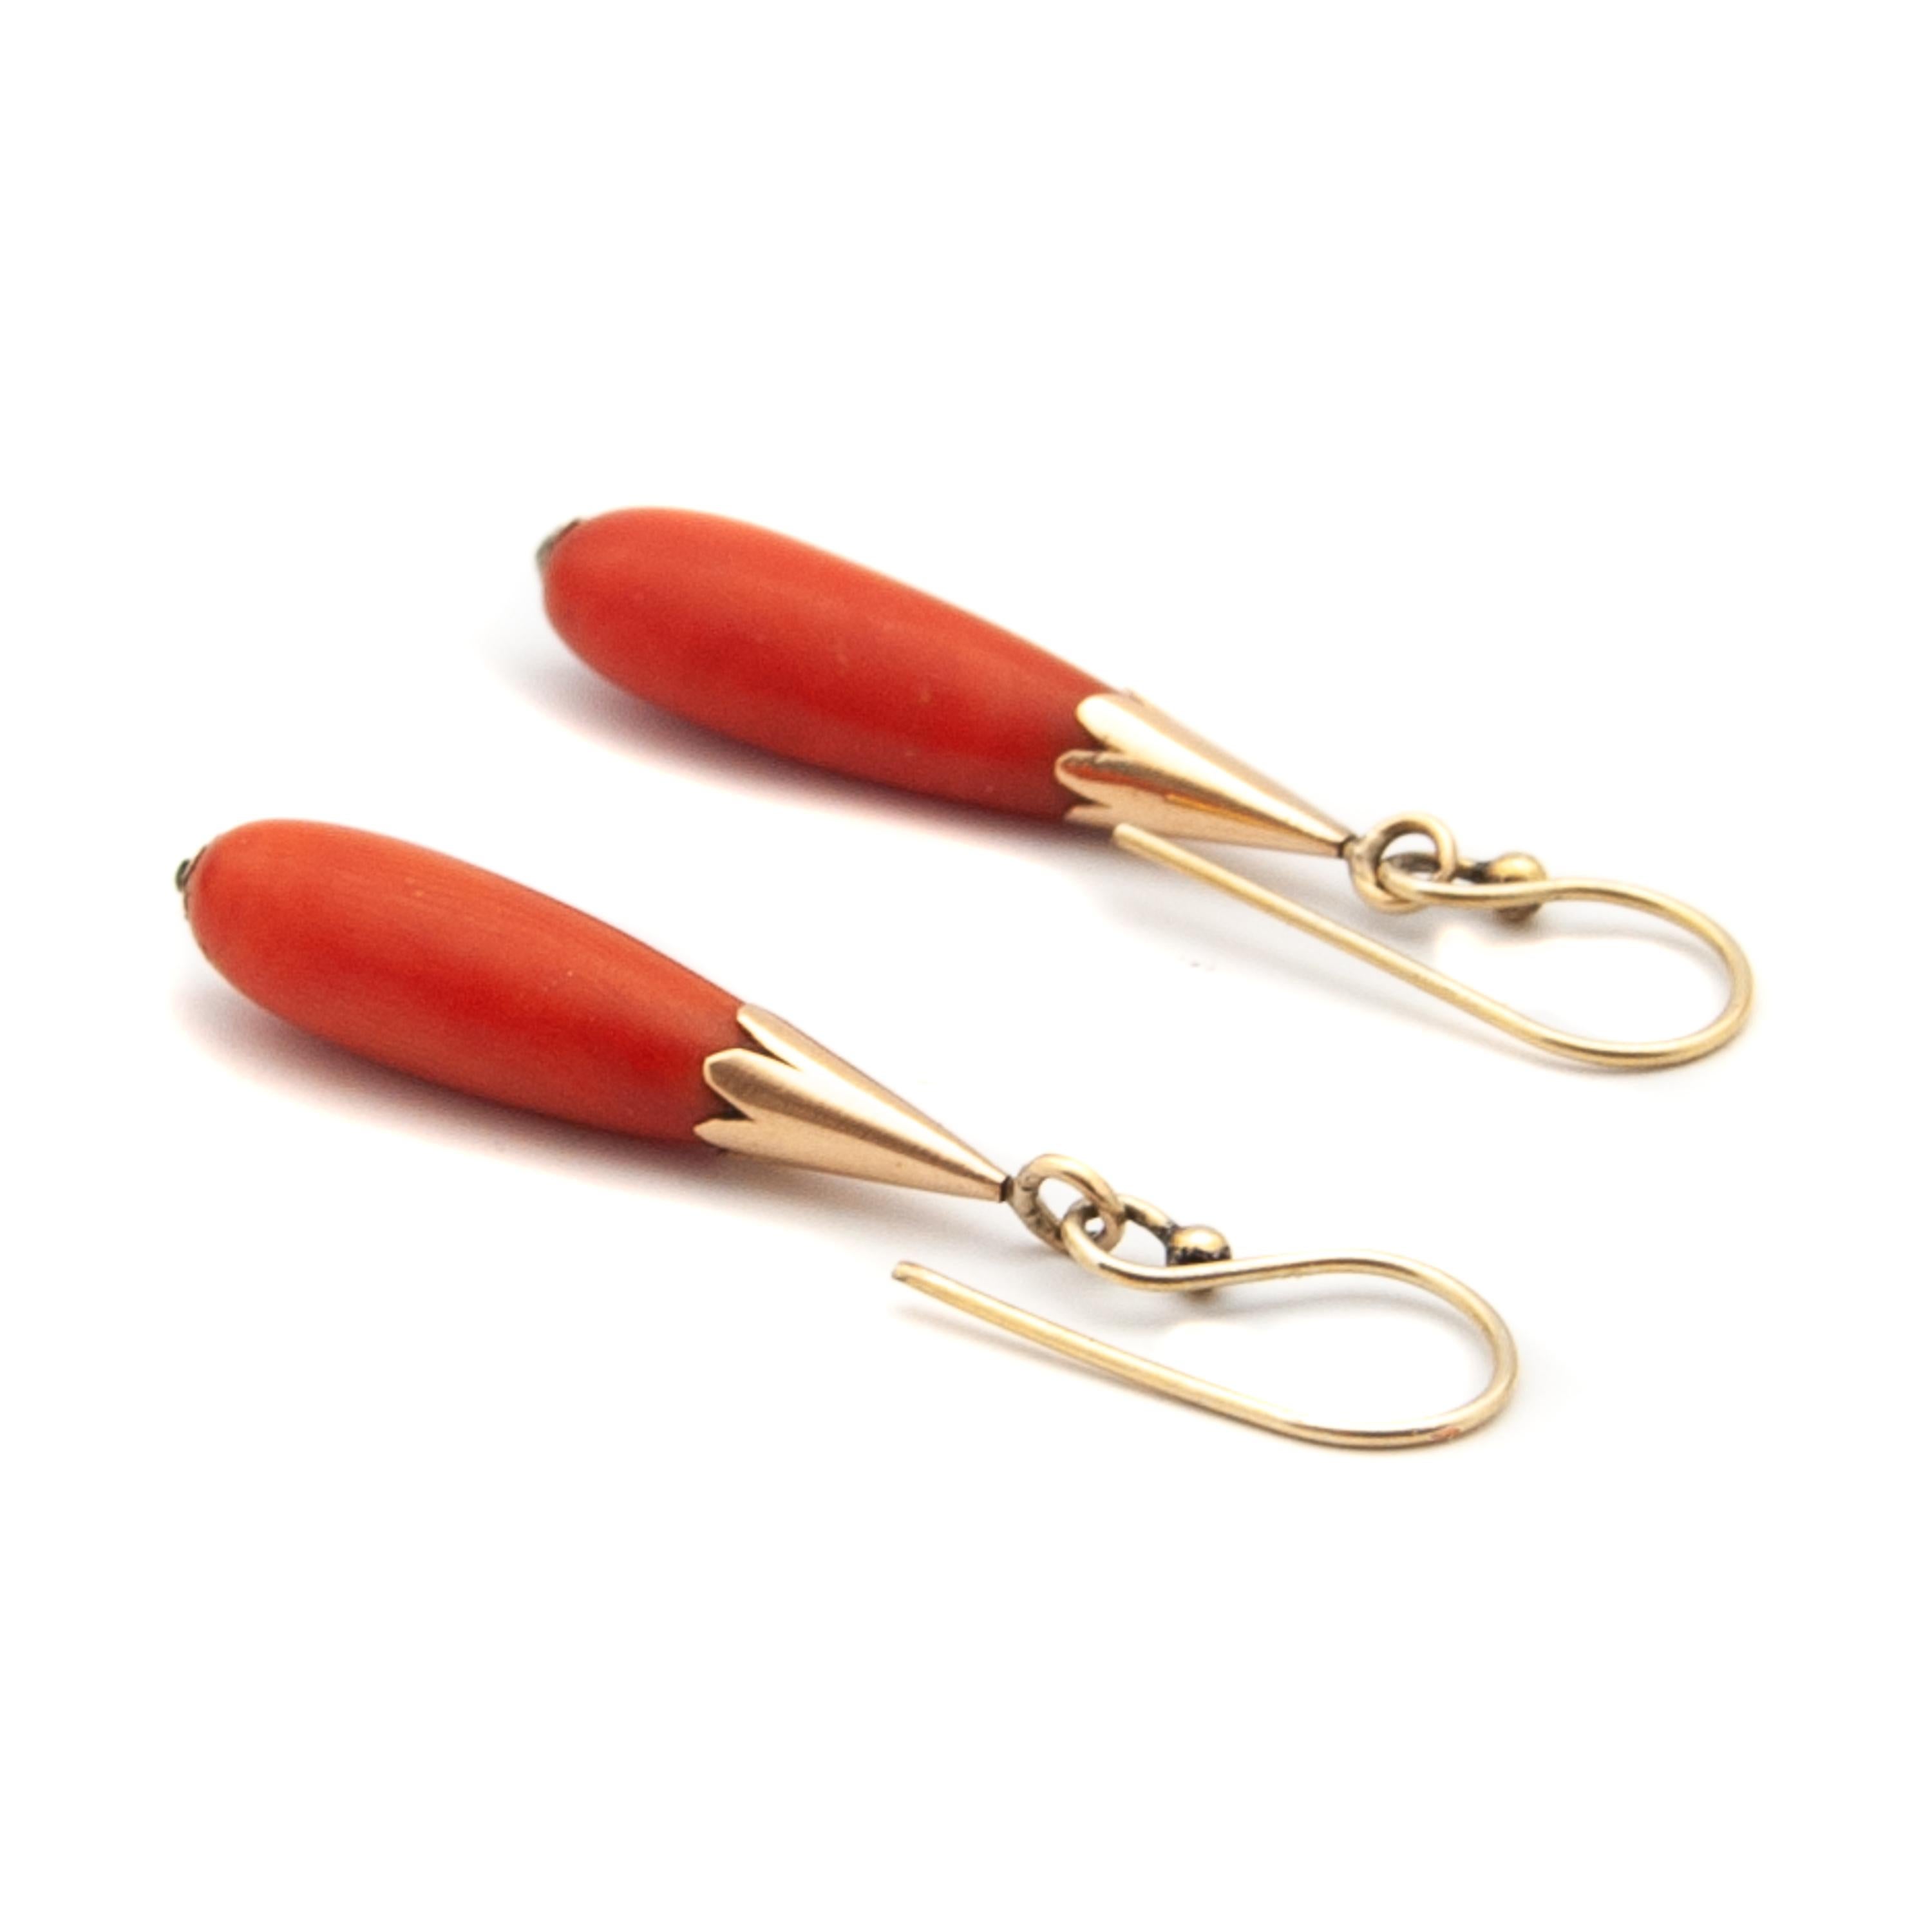 Pair of coral dangle earrings made of 14 karat yellow gold. The earrings have beautifully coral drop-shaped pendants, set in gold jagged caps. The gold caps have fringed edges. 

The *coral earrings are in good condition. The coral differ slightly